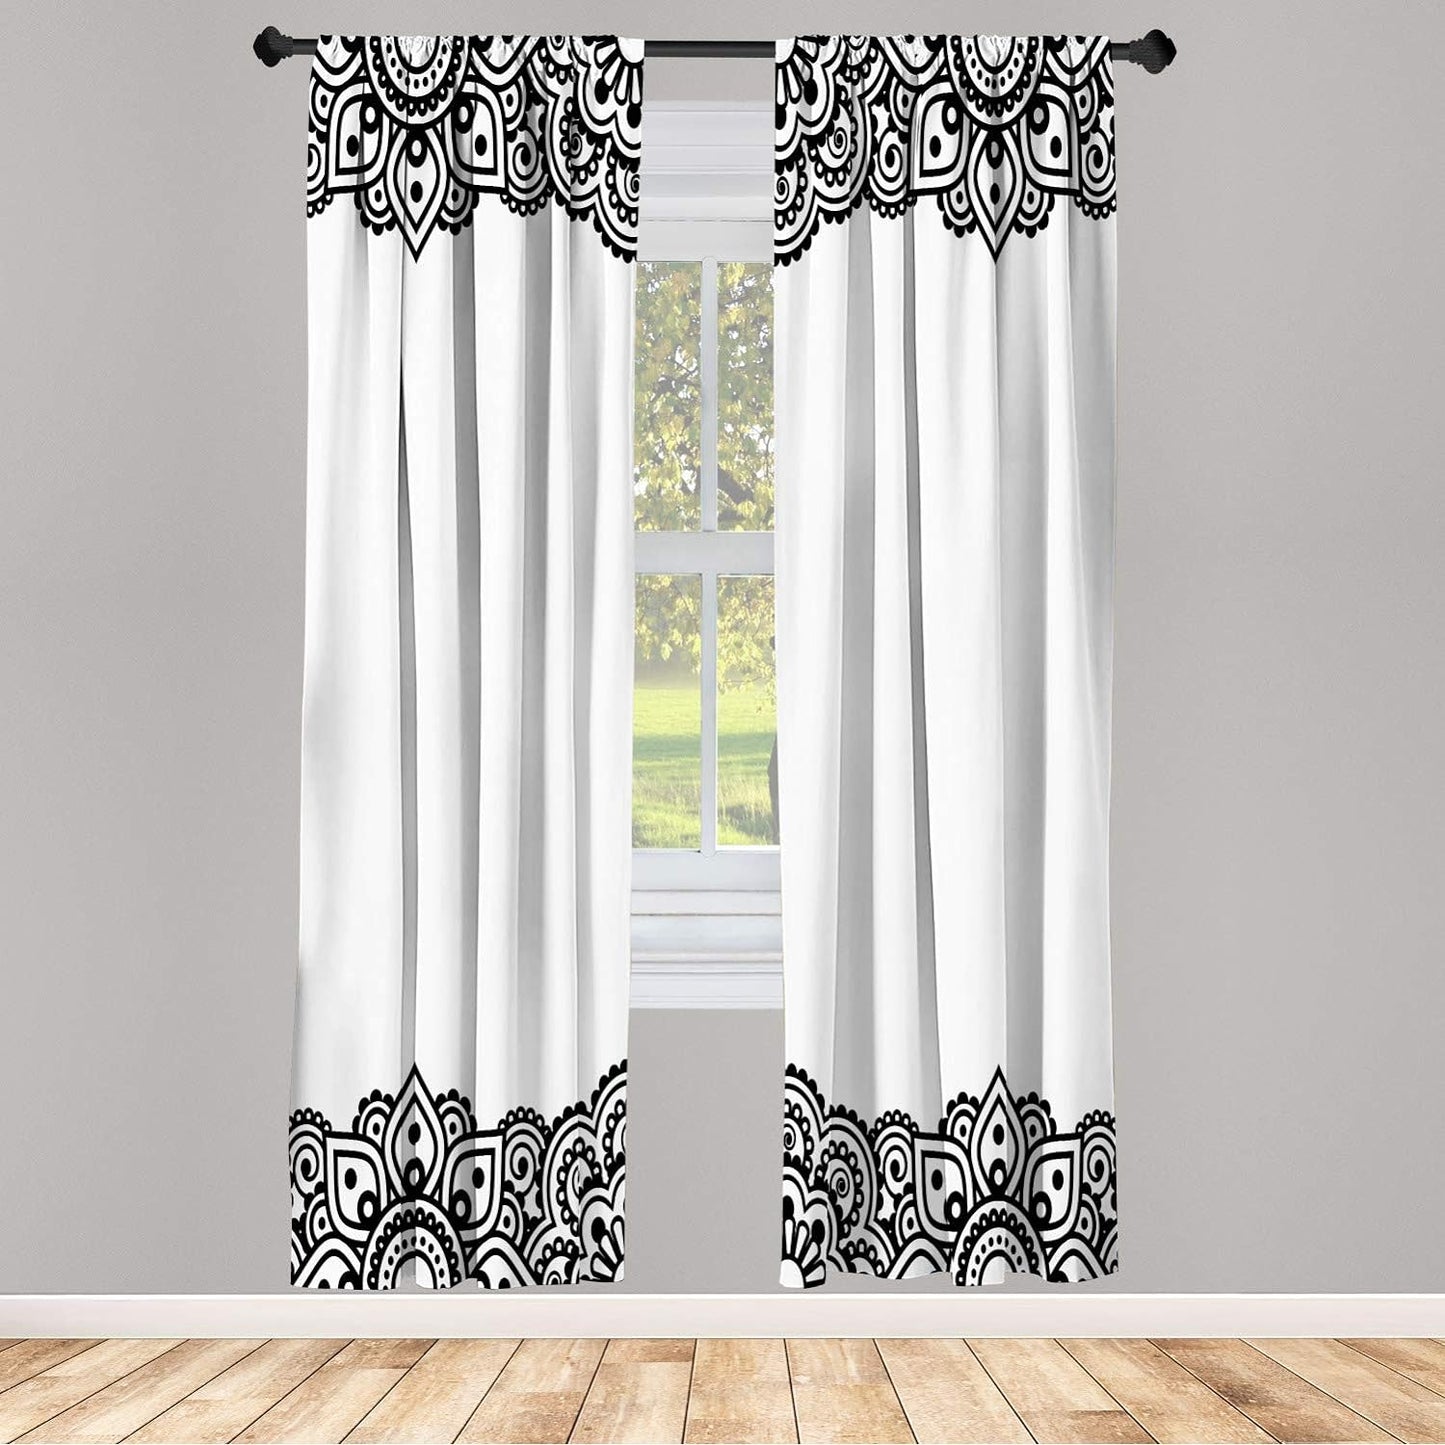 Ambesonne Beige Window Curtains, Floral Ornamental Pattern with Wedding Bouquet Blossoming Nature Botanical Print, Lightweight Decor 2-Panel Set with Rod Pocket, Pair of - 28" X 84", Beige Dust  Ambesonne White Black Pair Of - 28" X 84" 